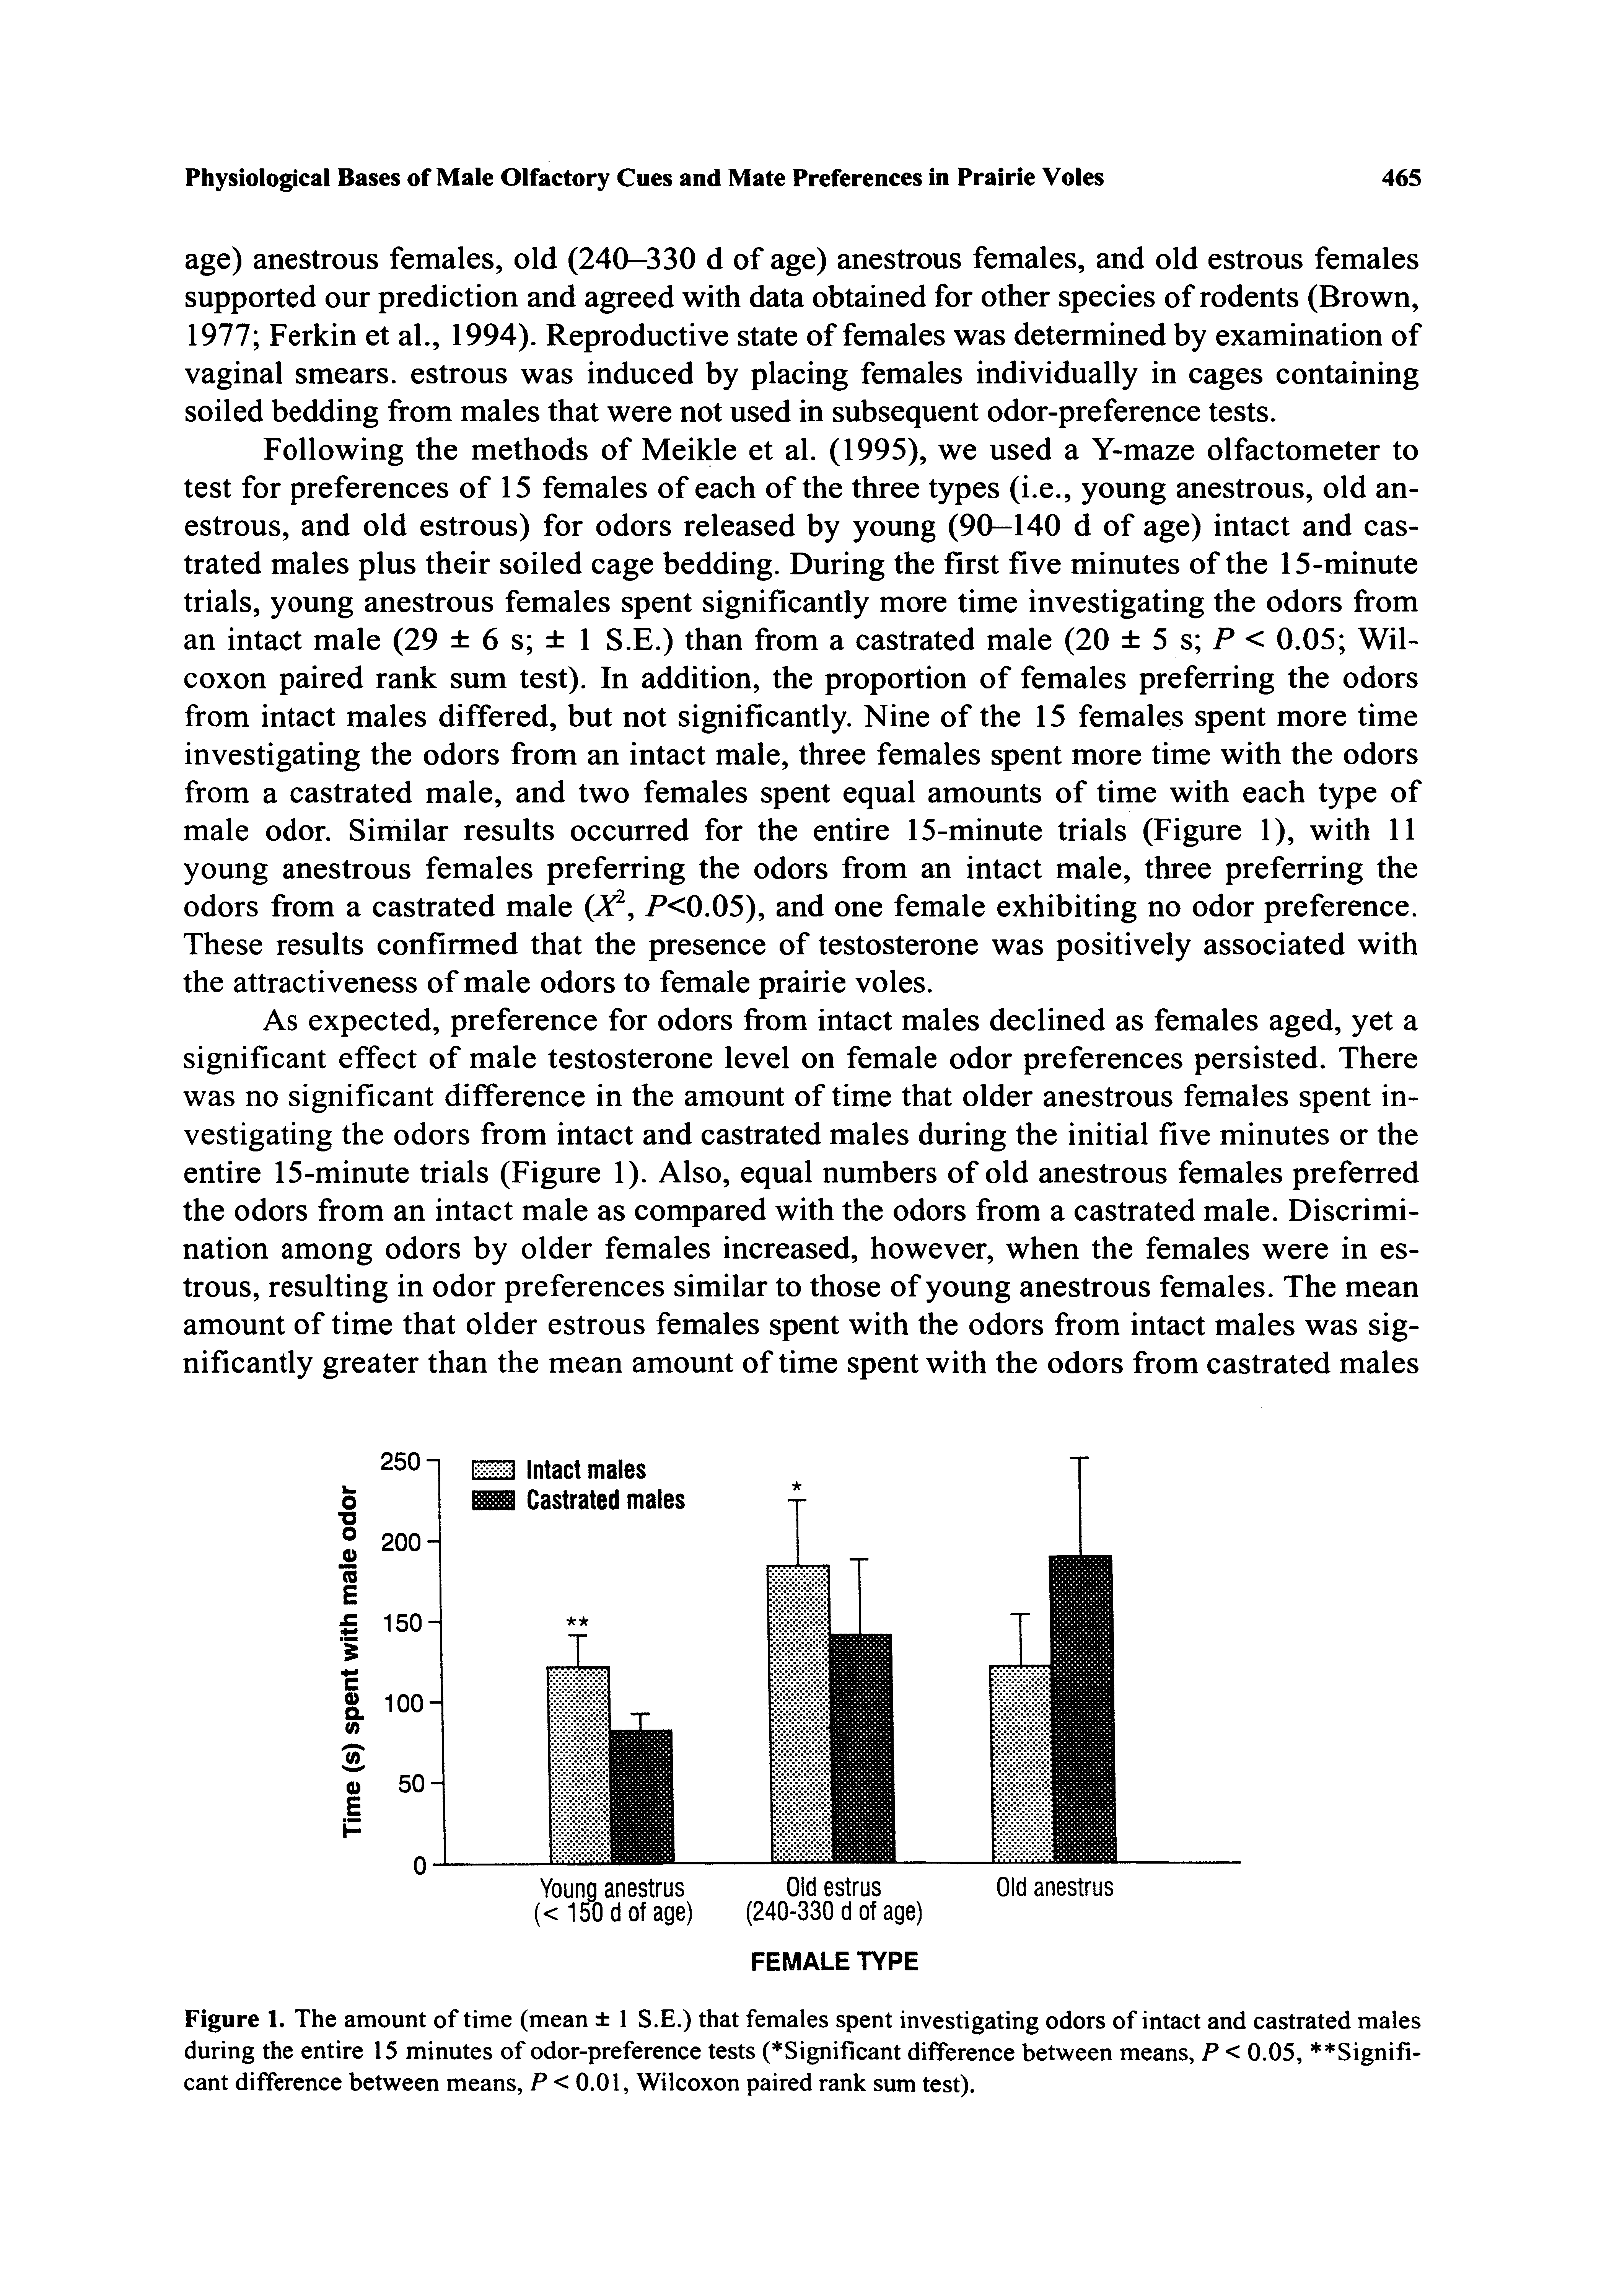 Figure 1. The amount of time (mean 1 S.E.) that females spent investigating odors of intact and castrated males during the entire 15 minutes of odor-preference tests ( Significant difference between means, P < 0.05, Signifi-cant difference between means, P < 0.01, Wilcoxon paired rank sum test).